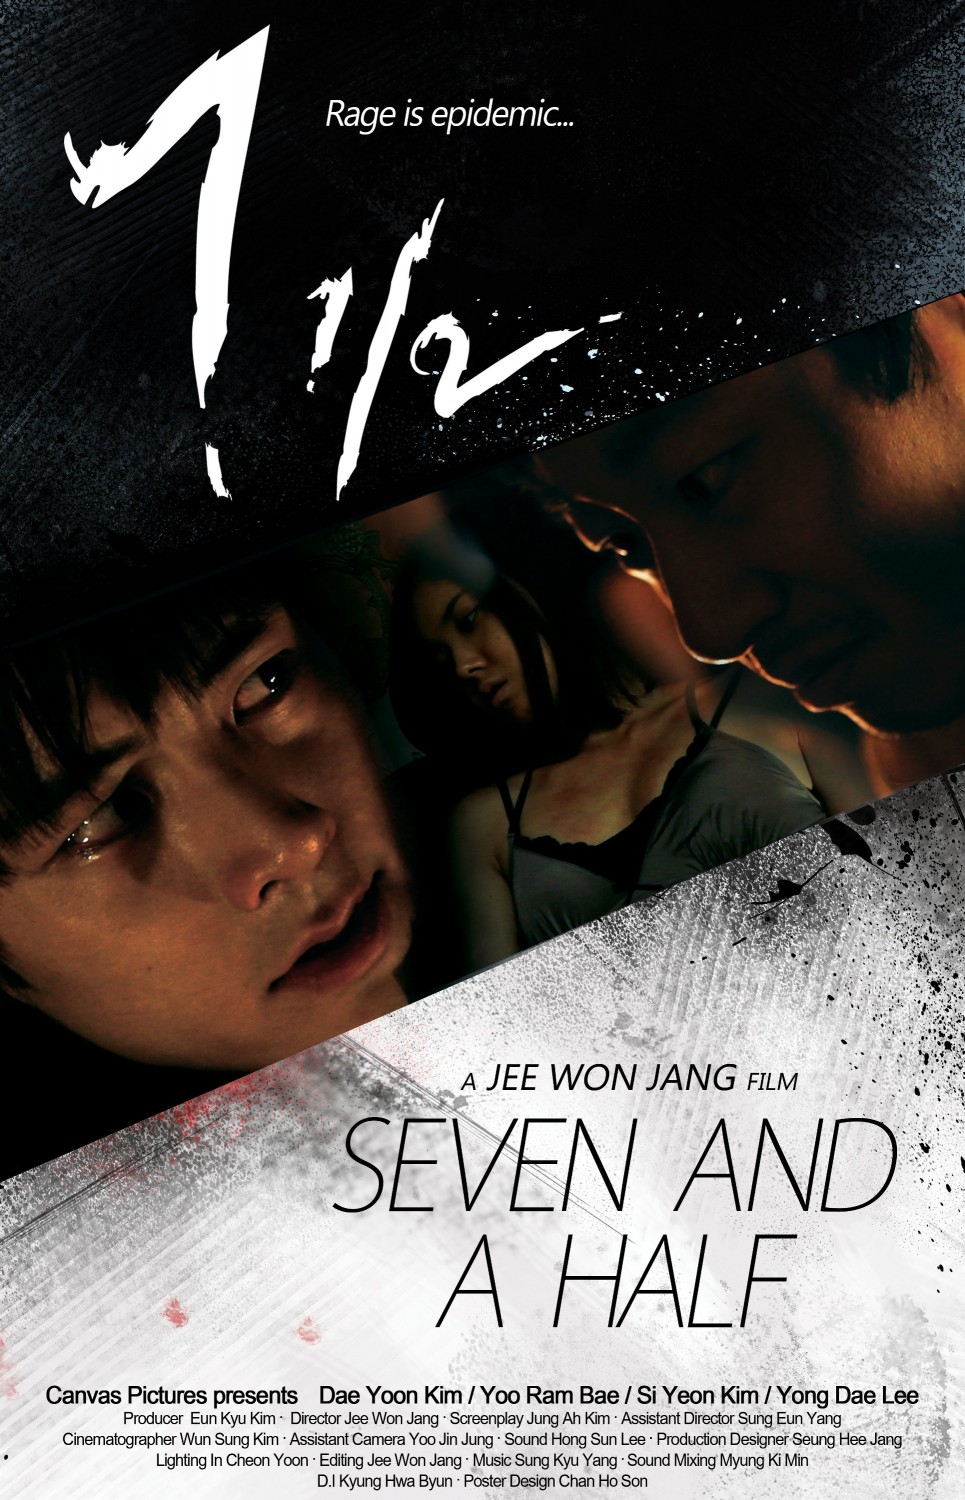 Extra Large Movie Poster Image for 7 1/2